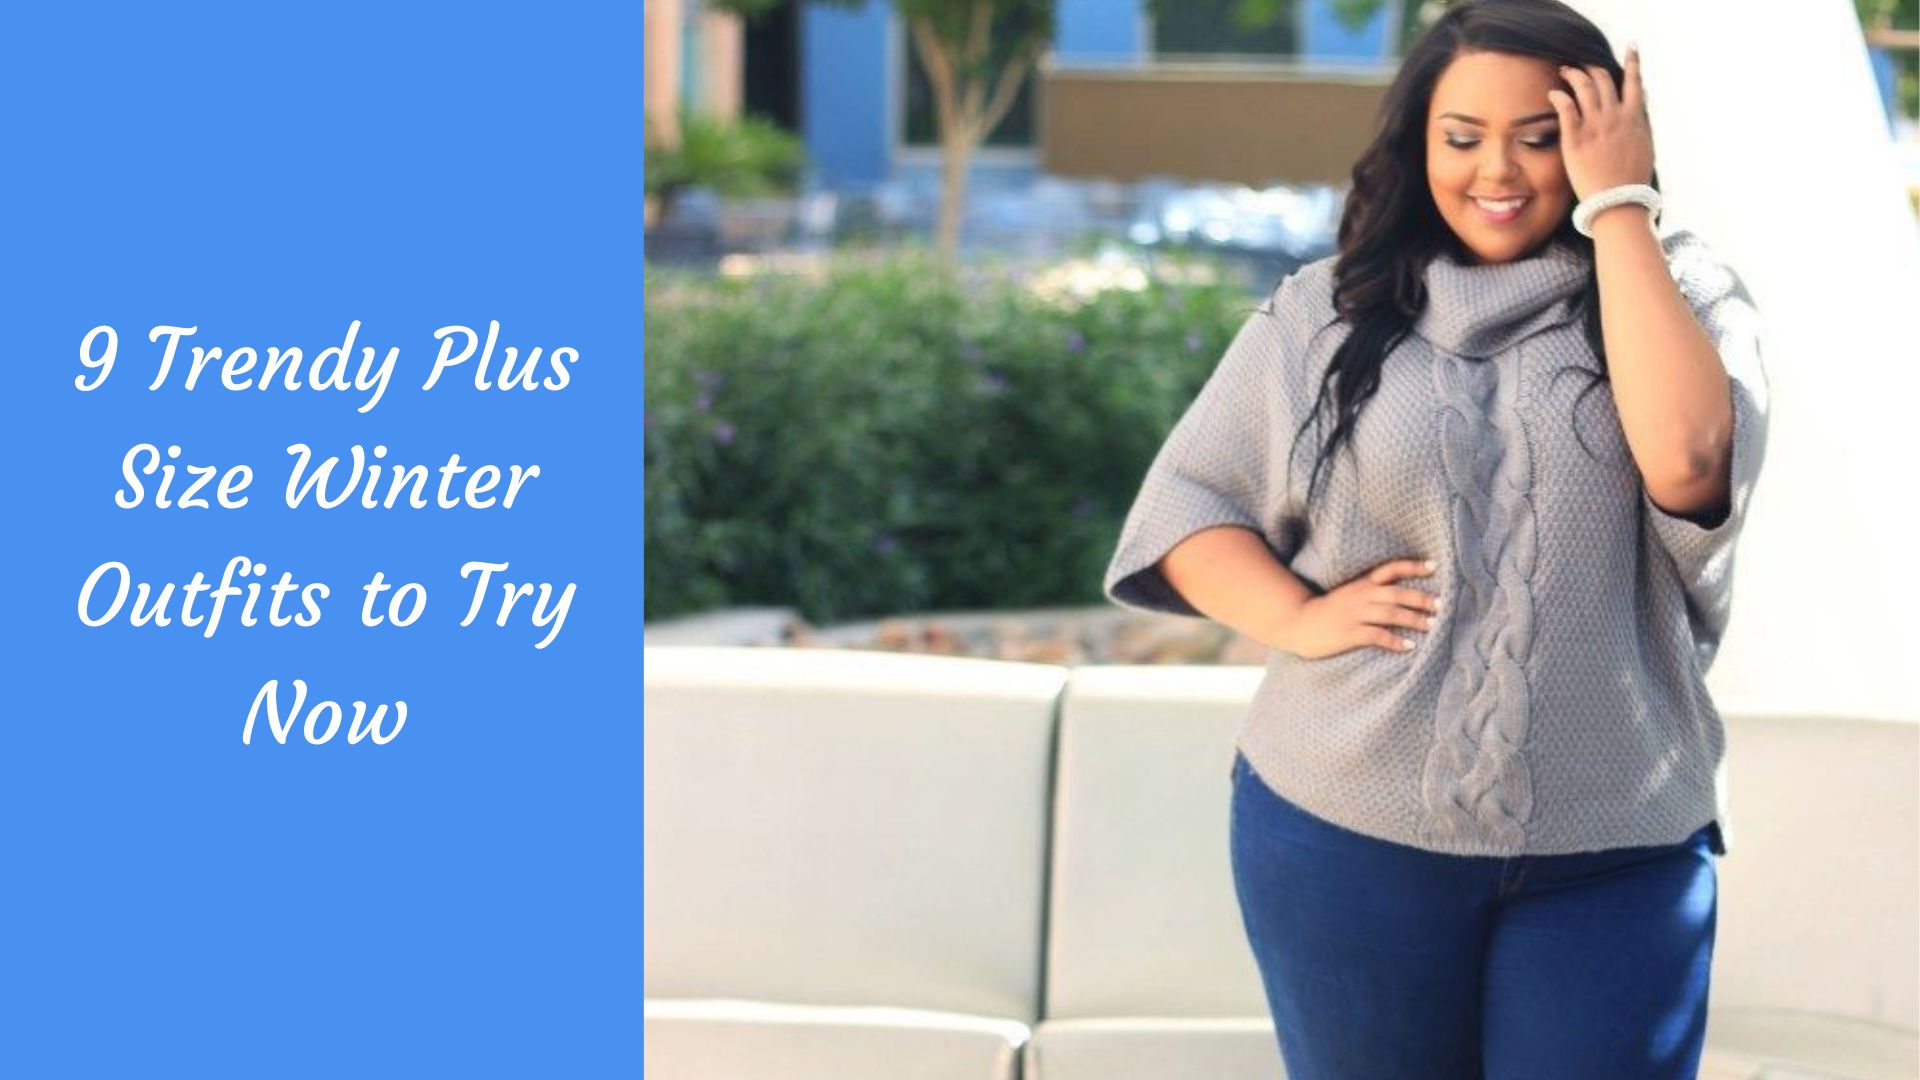 9 Trendy Plus Size Winter Outfits to Try Now